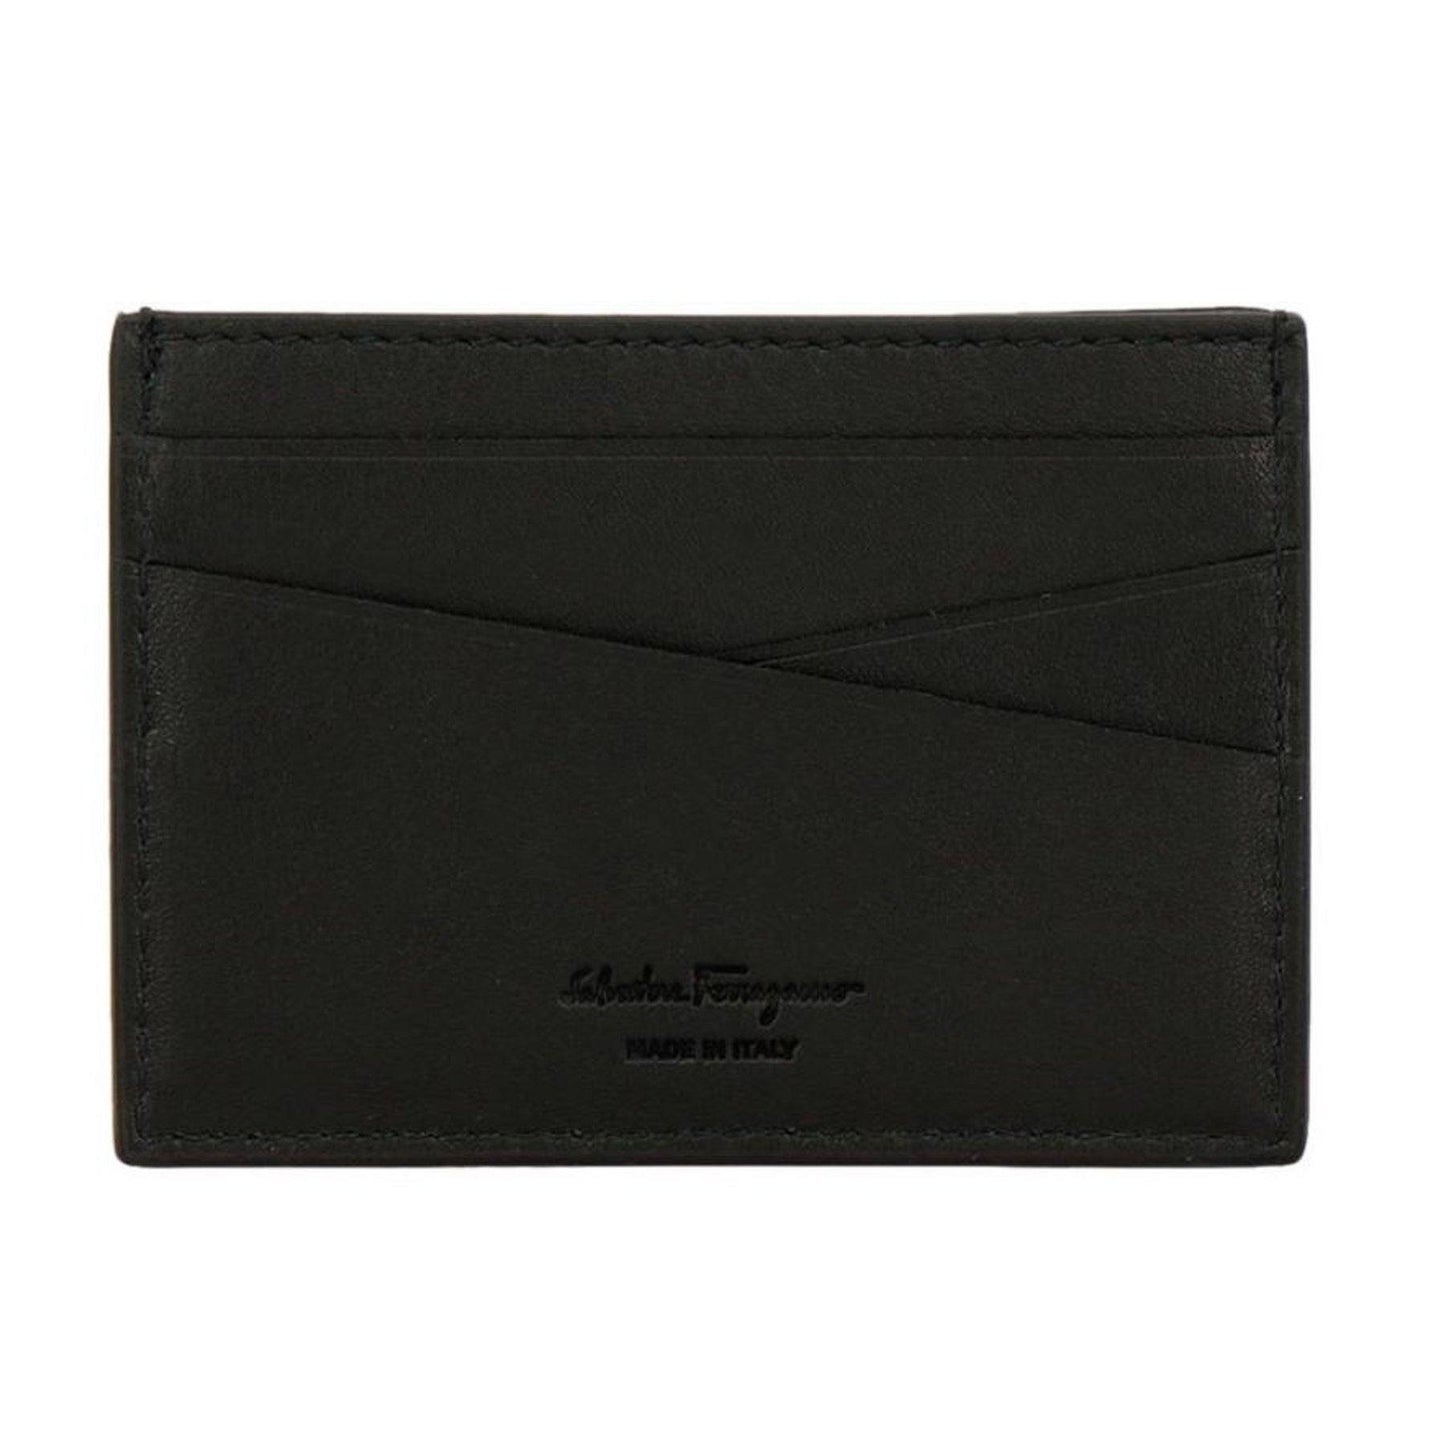 Card Holder 66 A075 - Cosmos Boutique New Jersey